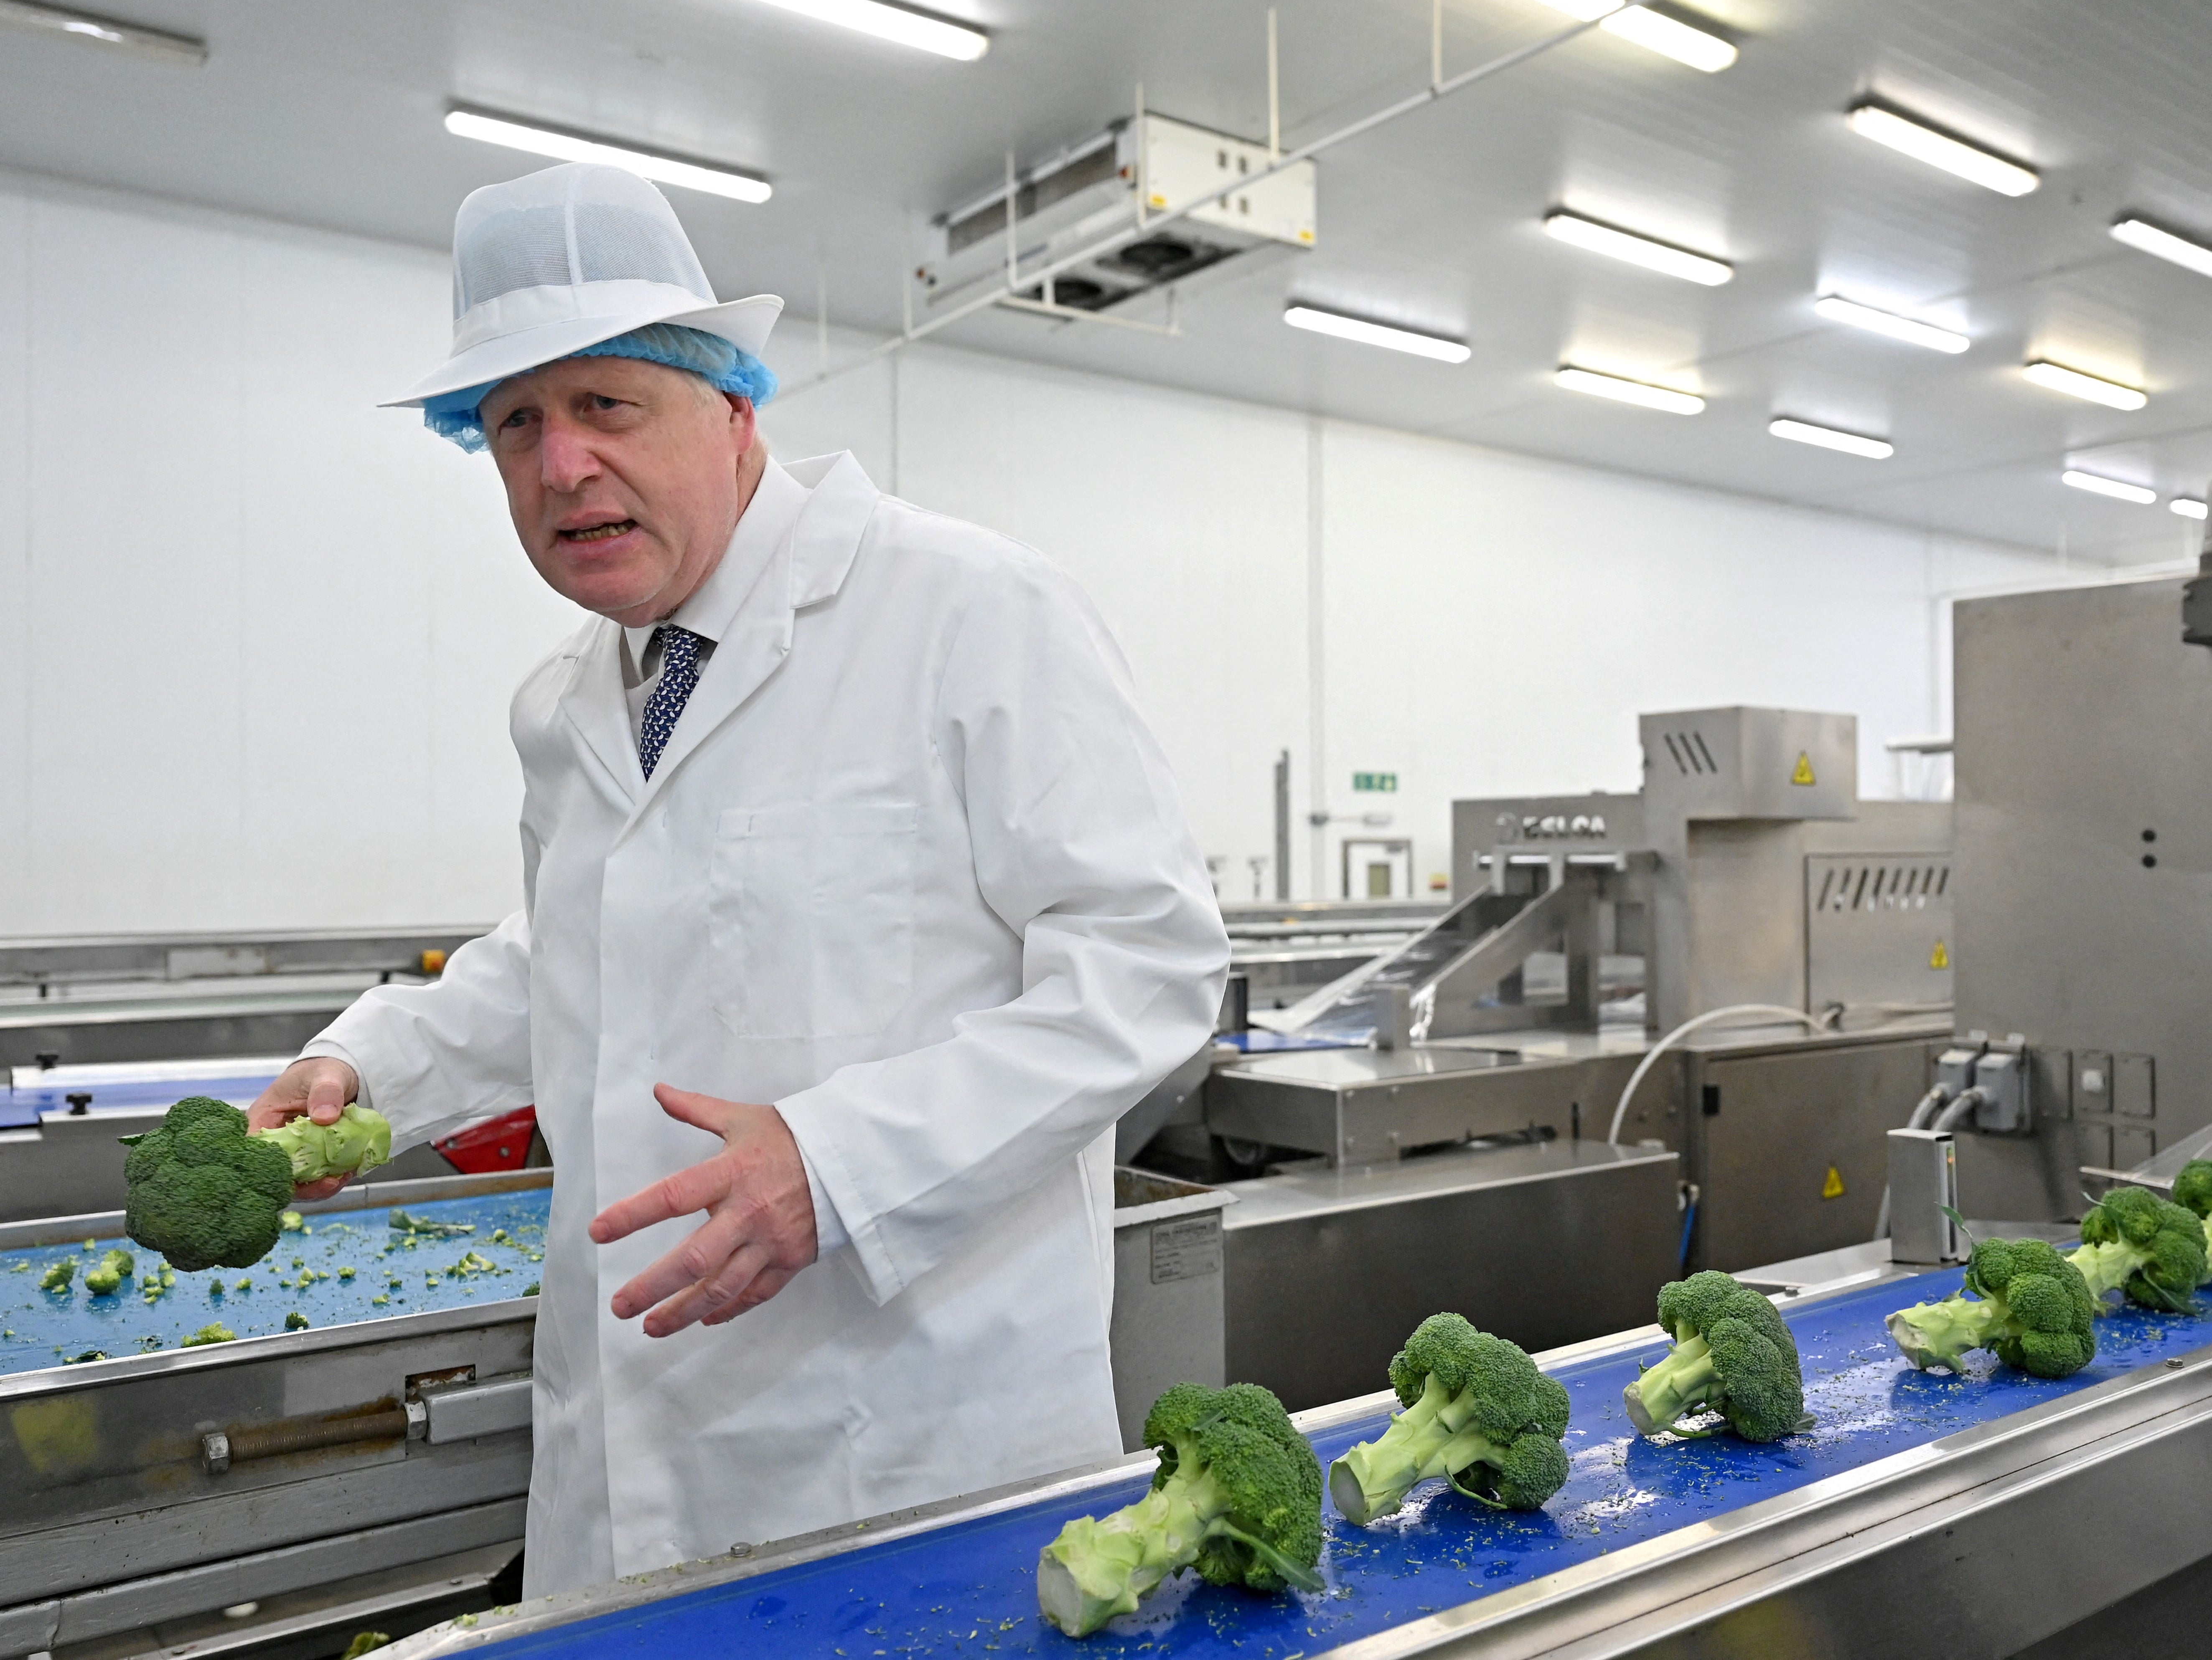 Boris Johnson’s food strategy has been widely criticised